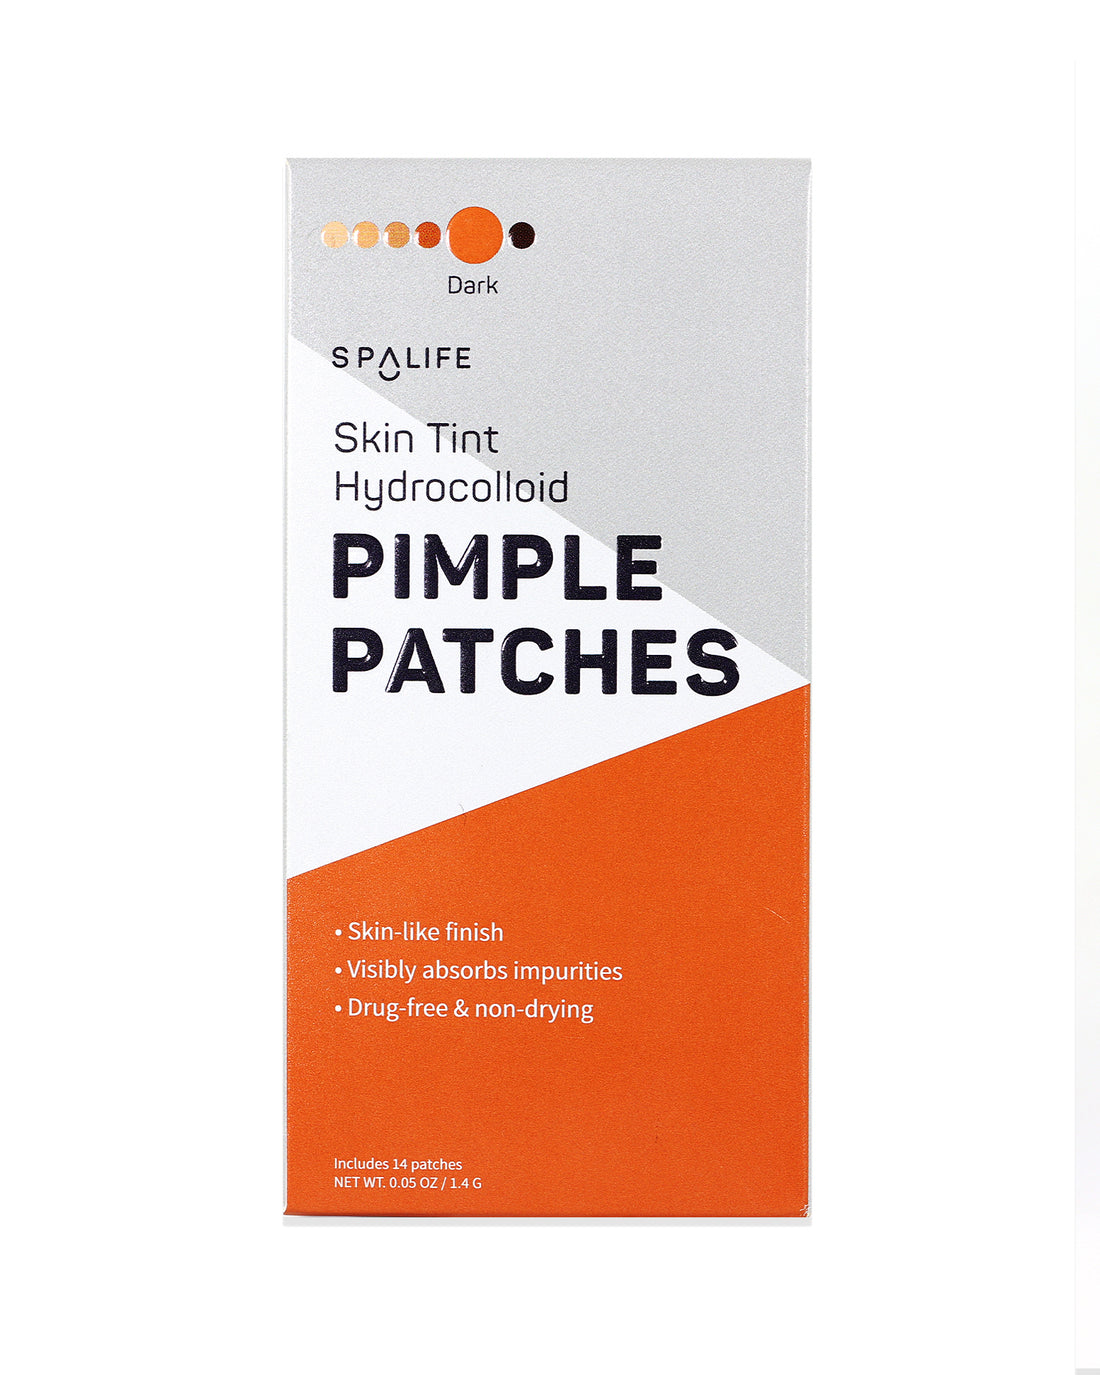 Skin_tint_pimple_patches_packe-490